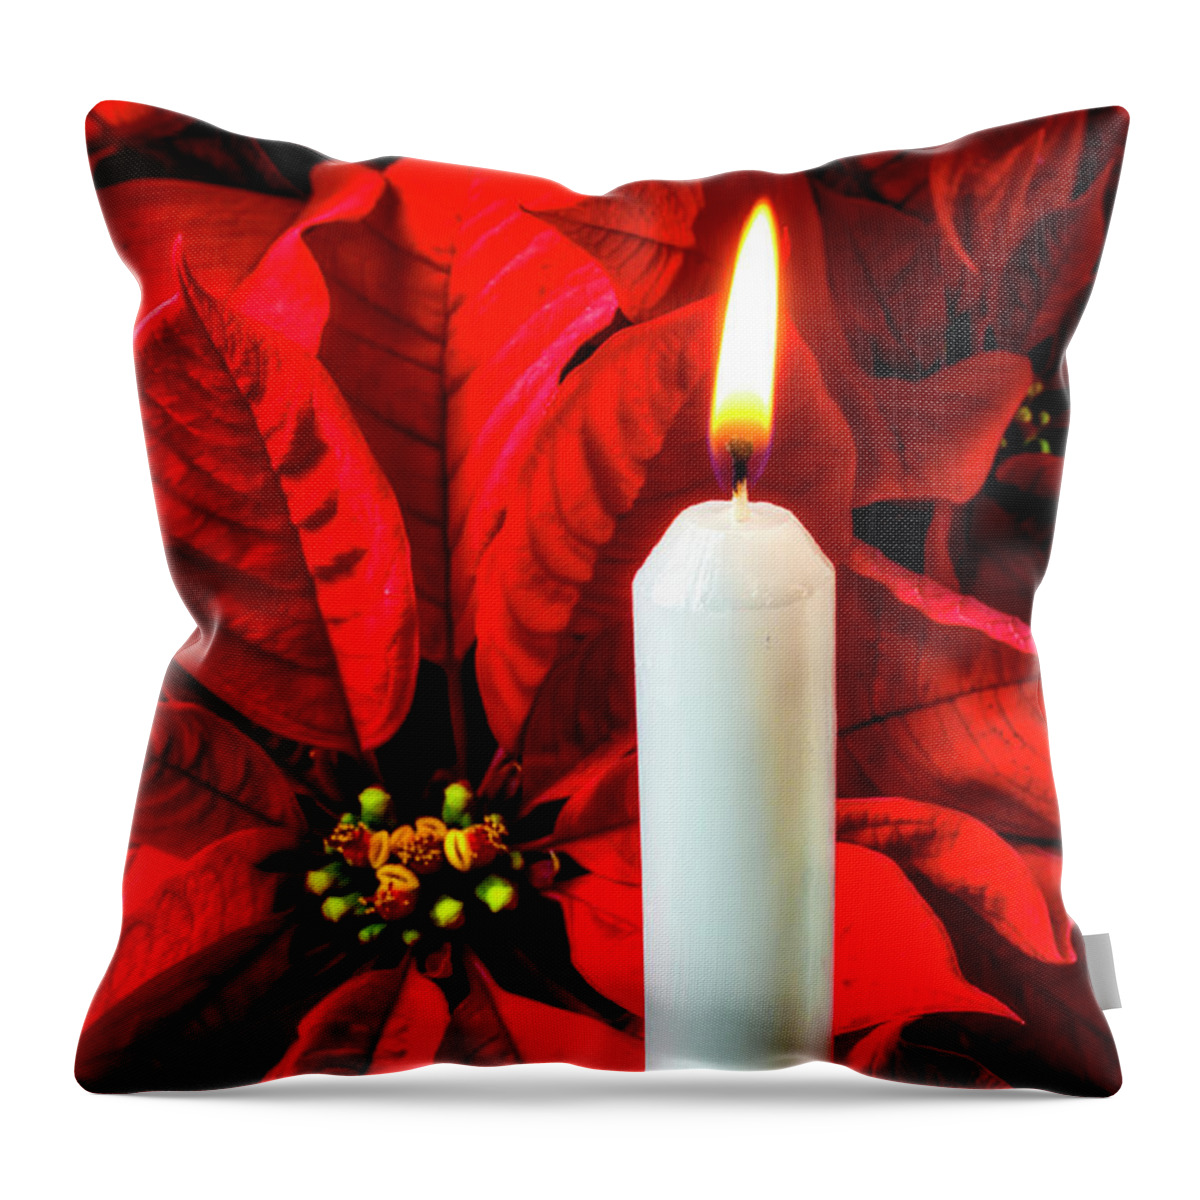 Red Poinsettia Throw Pillow featuring the photograph Candle And Poinsettia by Garry Gay